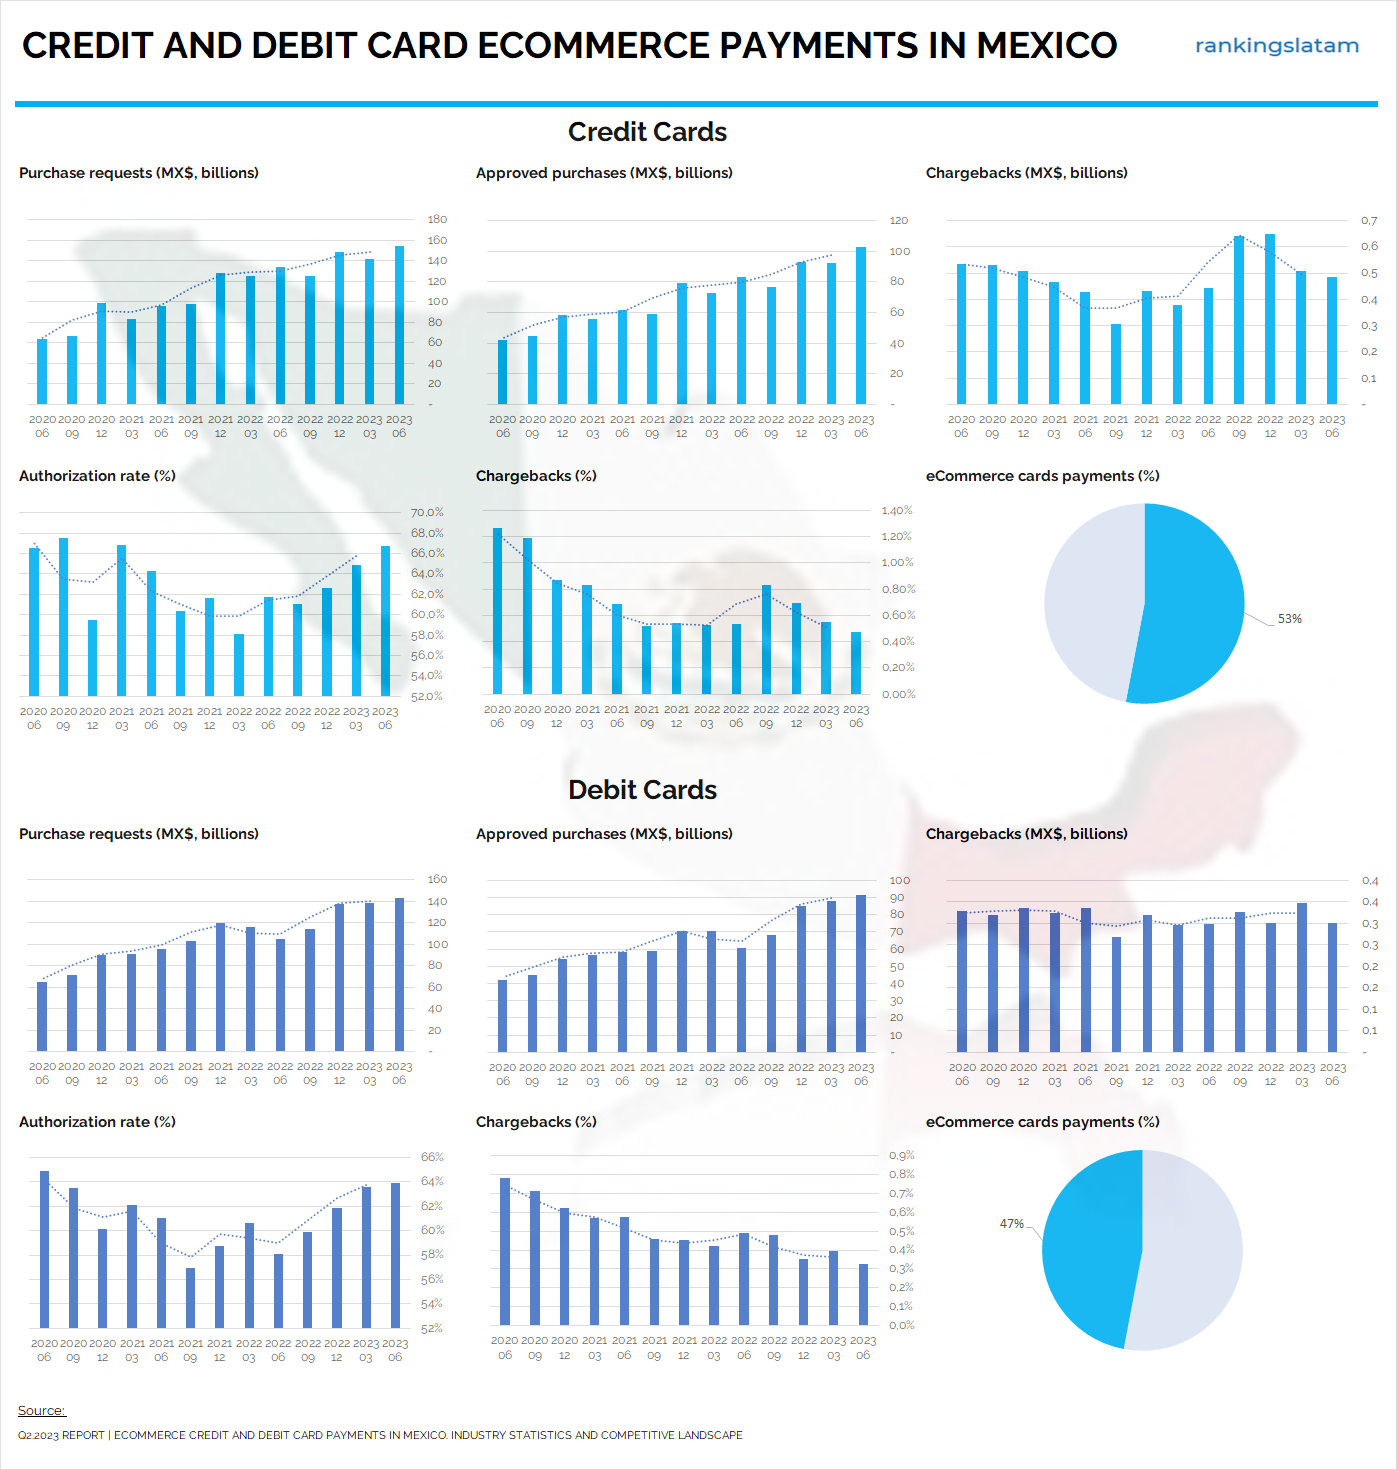 Ecommerce CREDIT AND DEBIT CARD PAYMENTS IN MEXICO. INDUSTRY STATISTICS AND COMPETITIVE LANDSCAPE